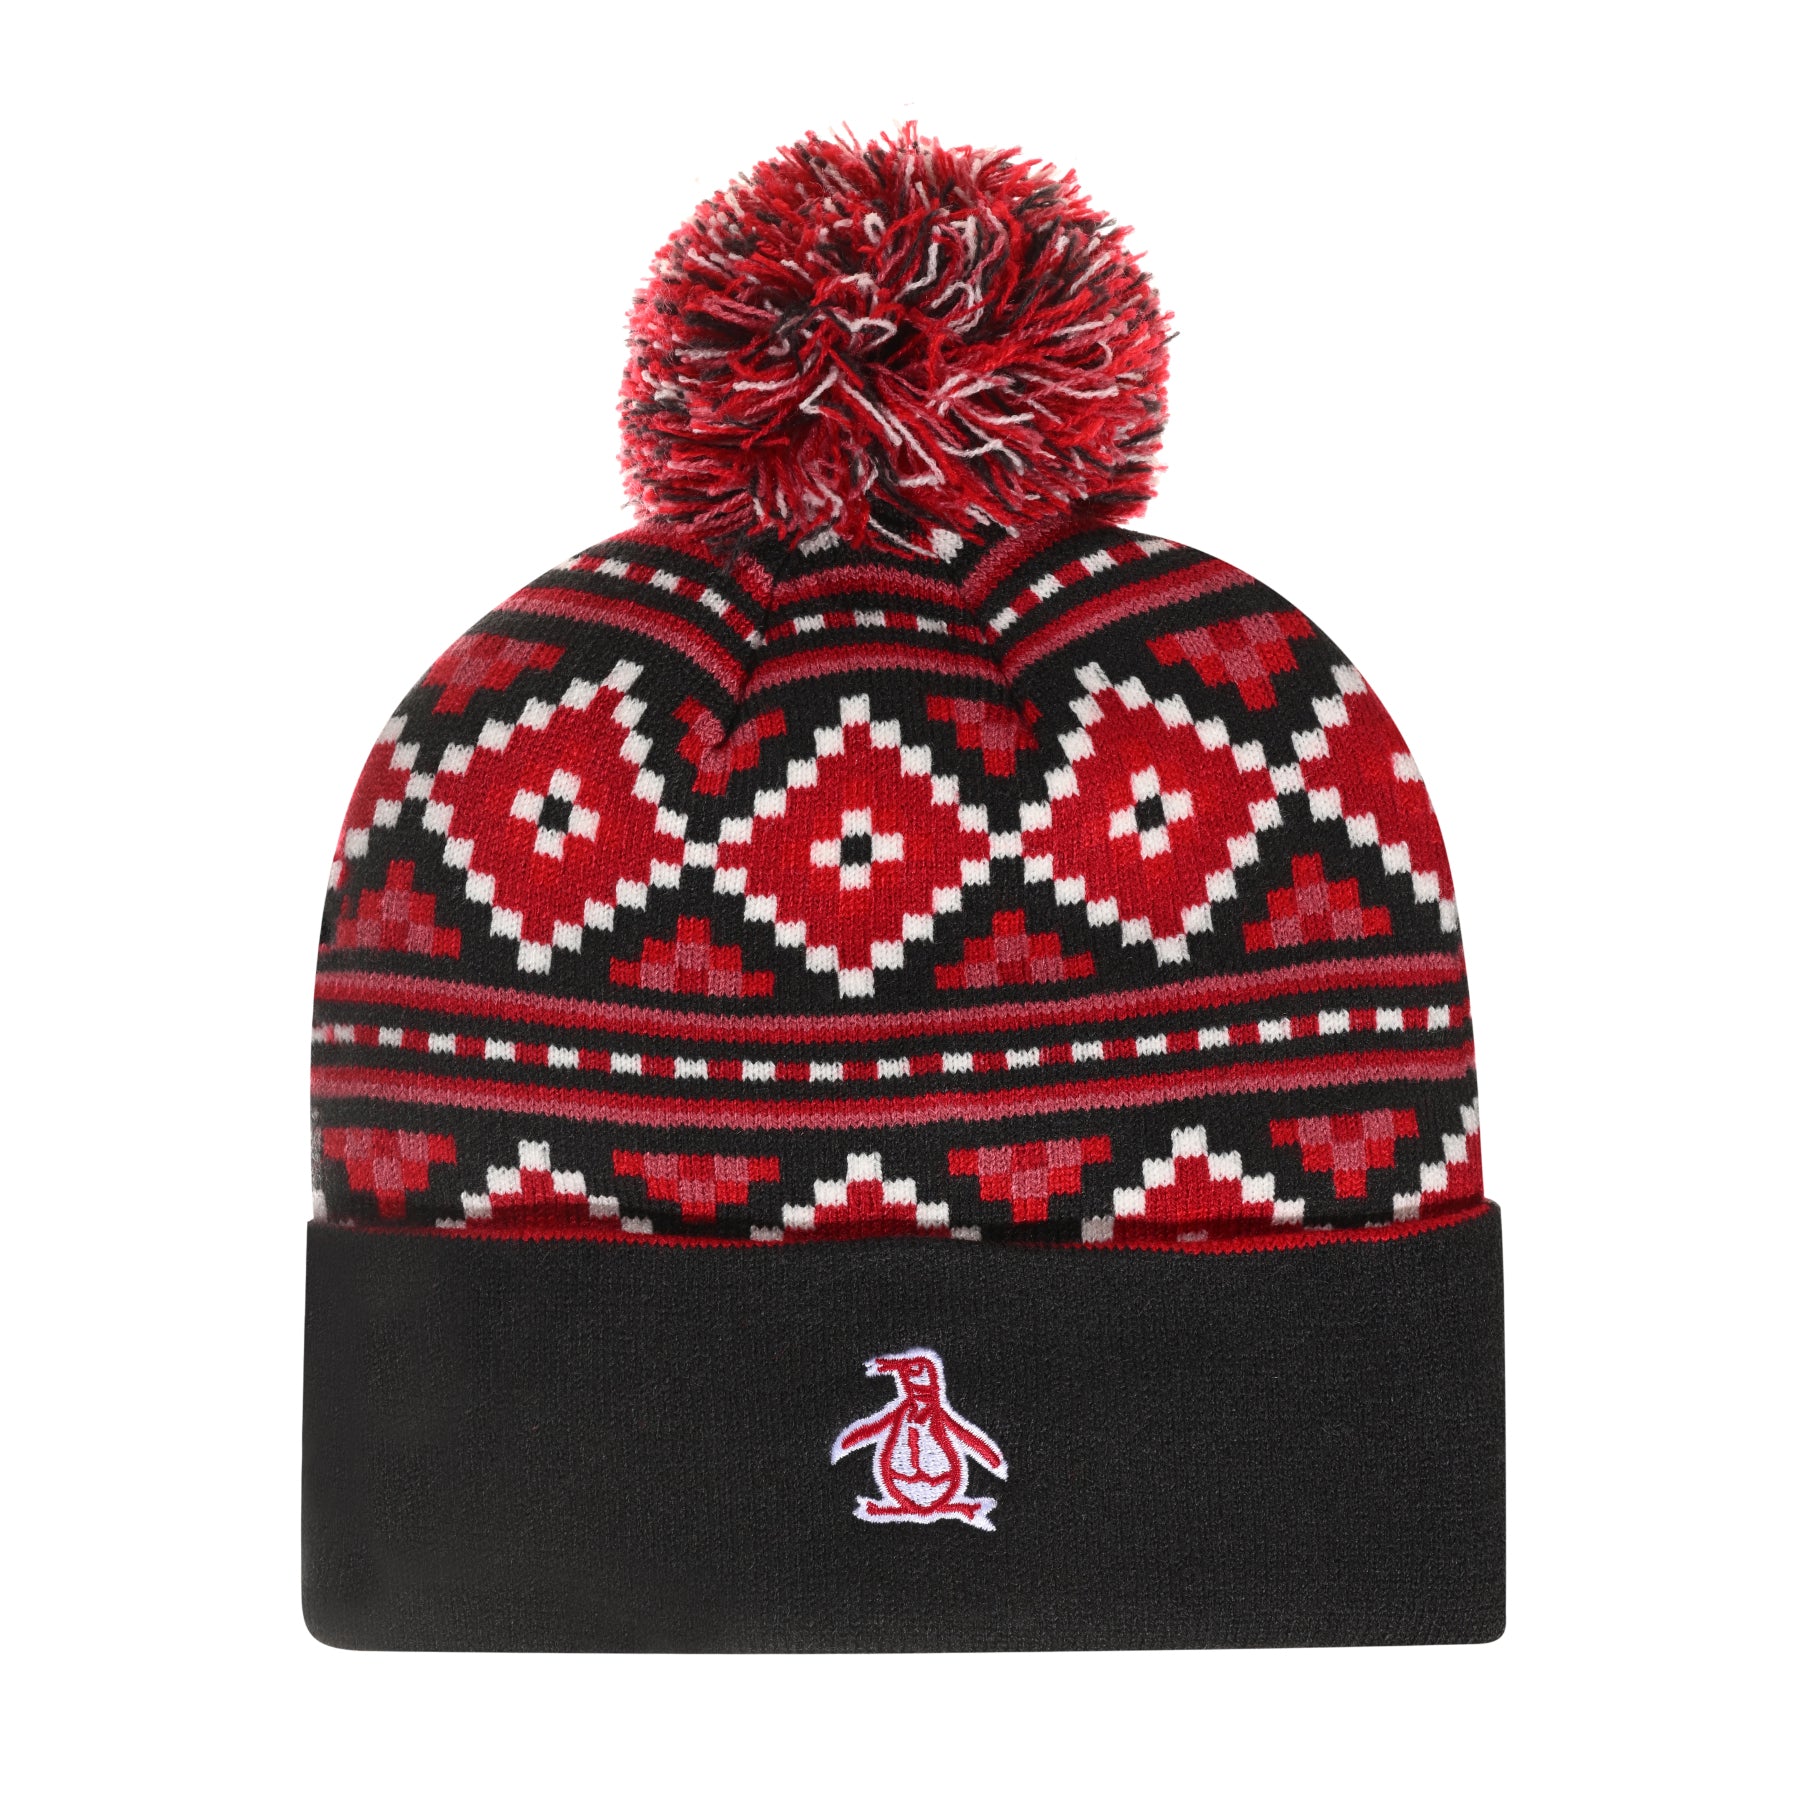 View Amersham Classic Knit Beanie In Dark Charcoal information